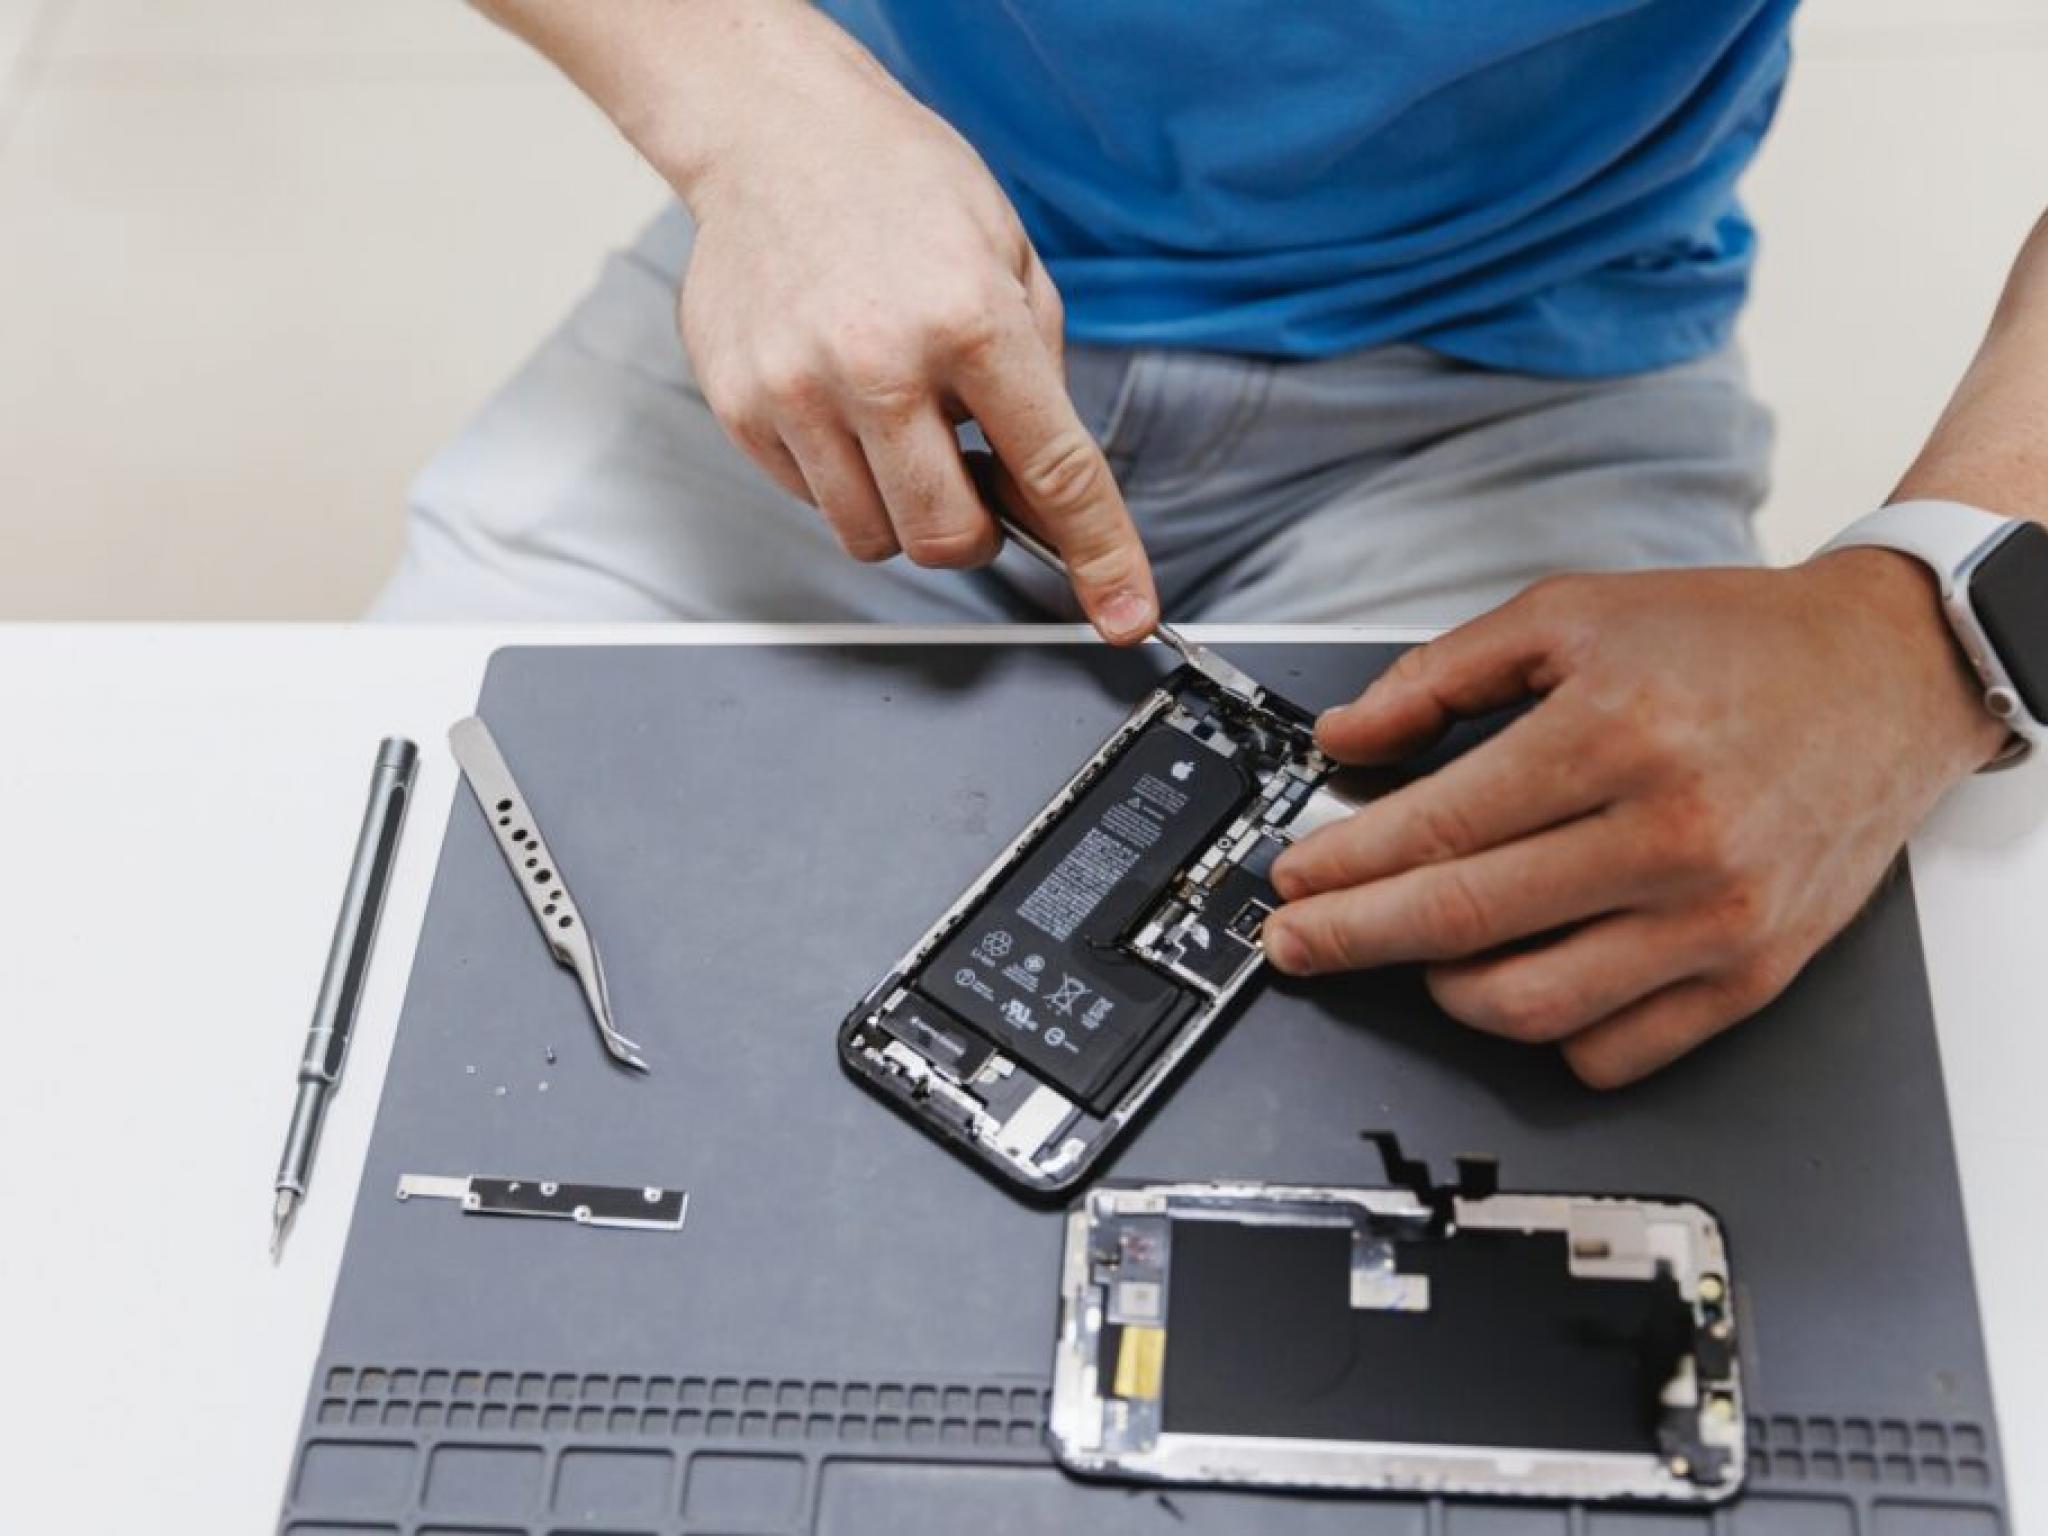  apple-device-repairs-might-soon-get-cheaper-and-easier-oregons-historic-right-to-repair-law-to-ban-parts-pairing 